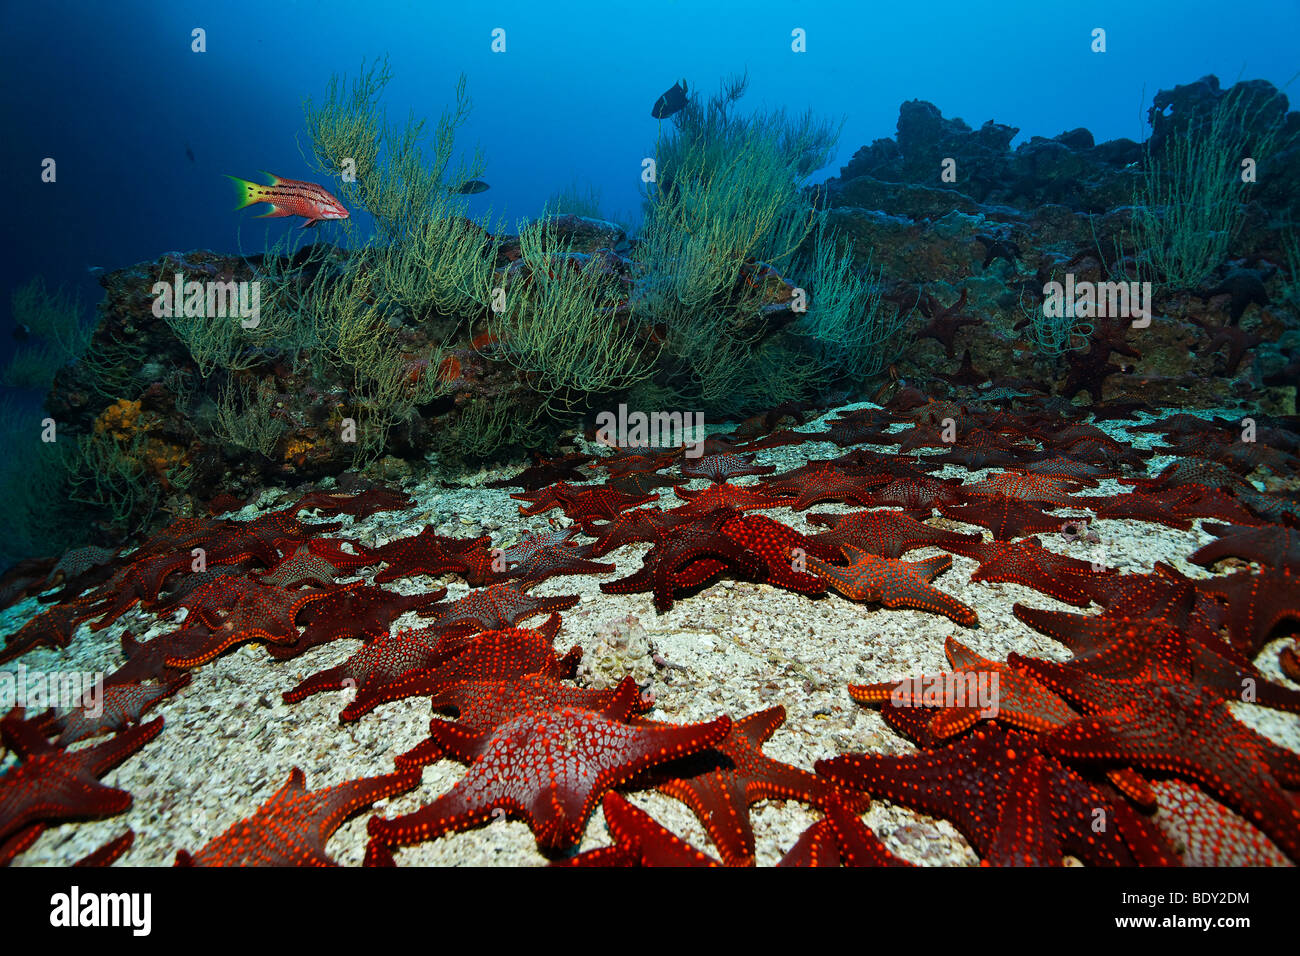 Gathering of Knobby Star Starfish (Pentaceraster cumingi) on sandy ground in front of a reef, Mexican Hogfish (Bodianus diplota Stock Photo